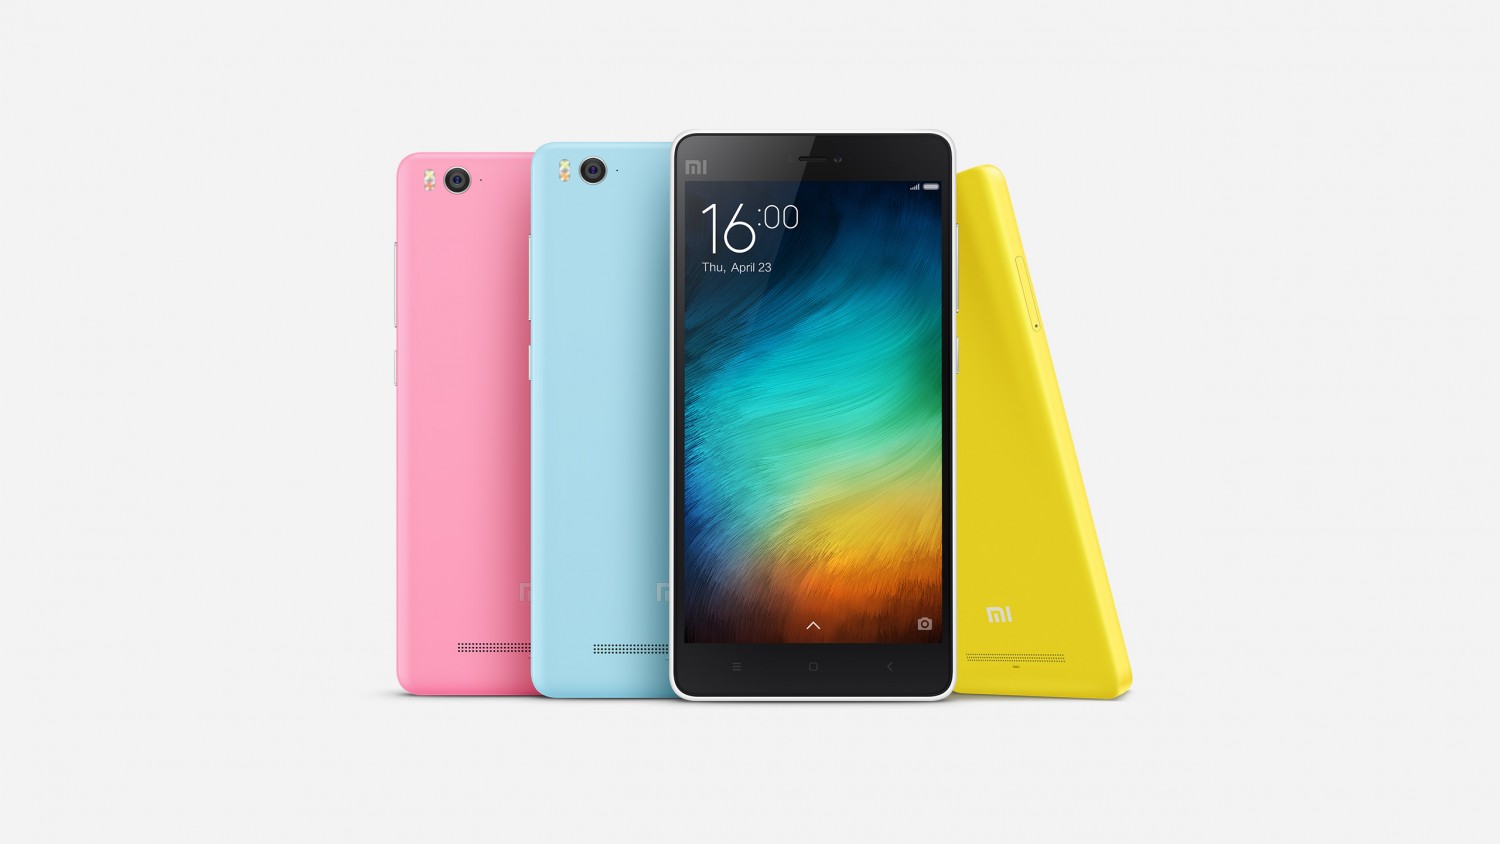 Xiaomi Mi 4i was the first Xiaomi phone to see its initial release outside of China